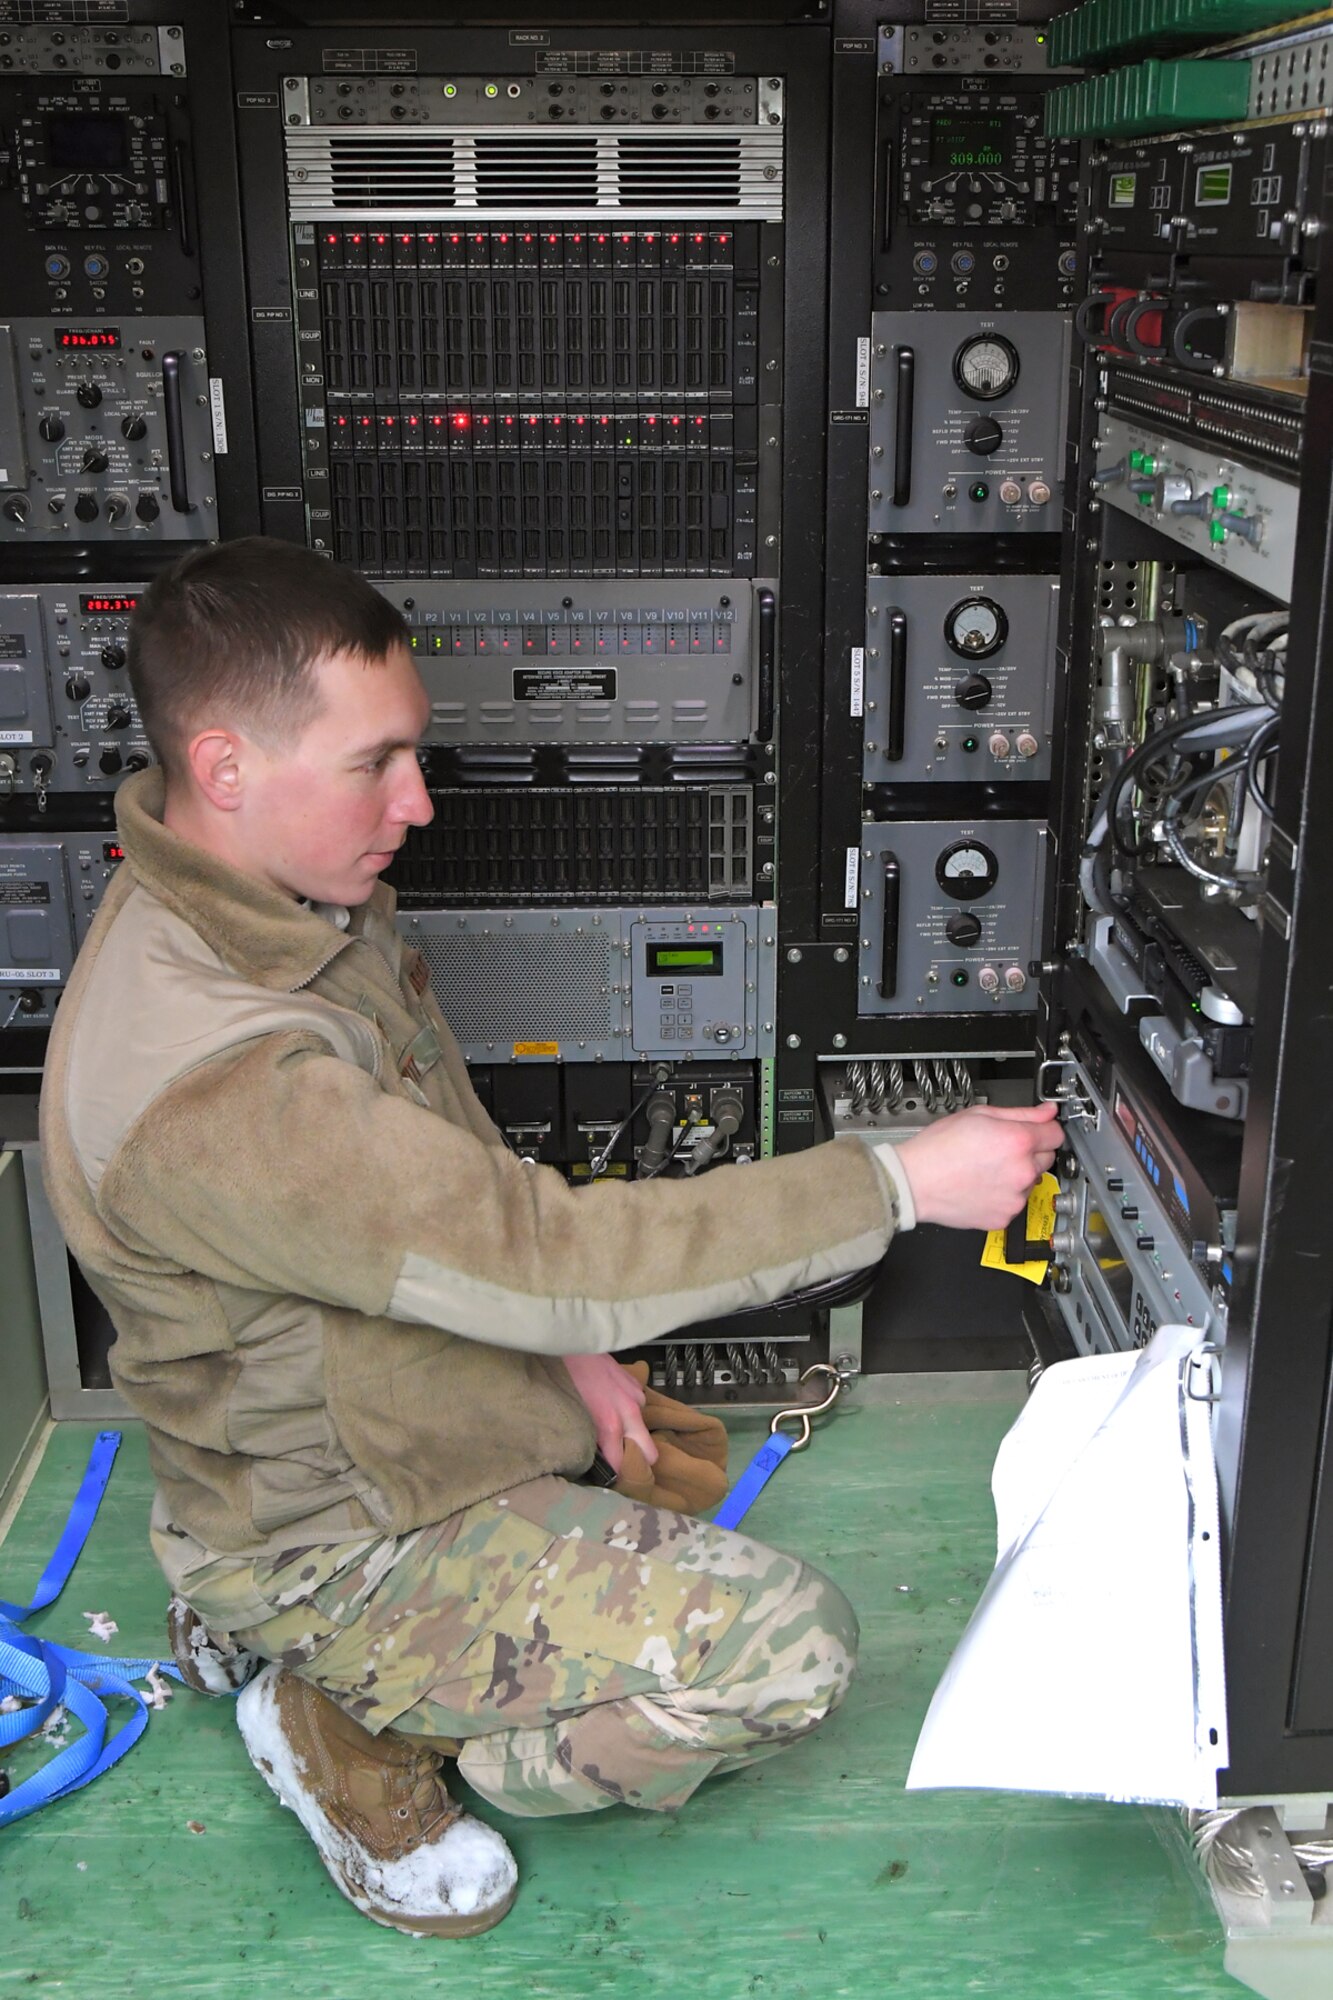 Staff Sgt. Zachary Witt, 729th Air Control Squadron, checks communications equipment Feb. 6, 2019, during a readiness exercise at Hill Air Force Base, Utah. The evolution was part of an exercise to mobilize and set up a deployed radar location and control reporting center. (U.S. Air Force photo by Todd Cromar)